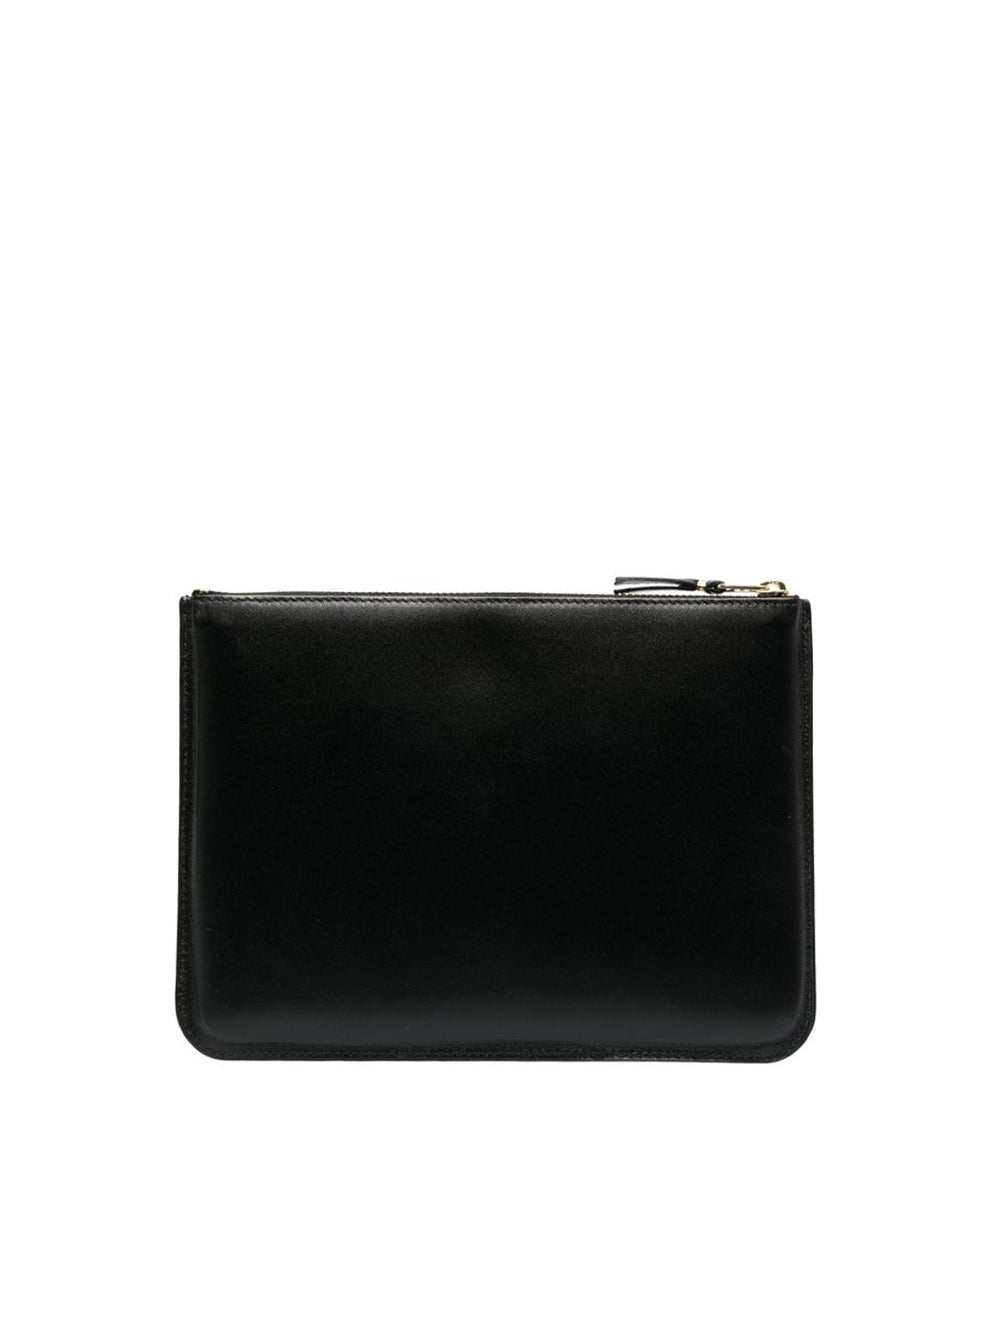 Large Leather Sachet With Black Applied Sachet